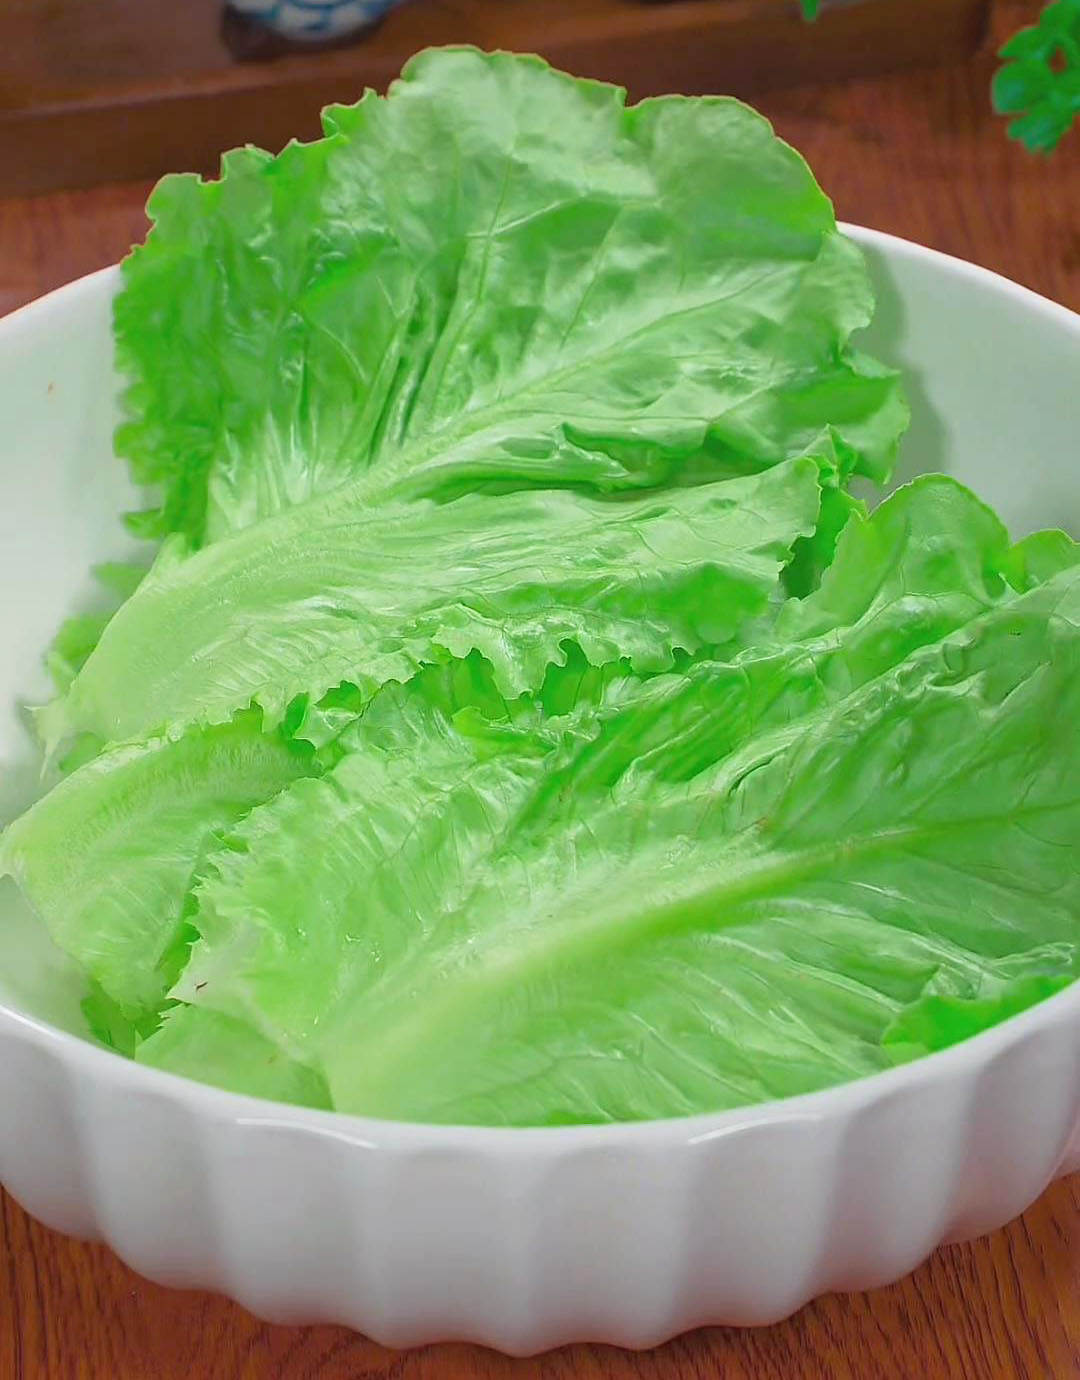 Chop the base of the lettuce, separate the leaves